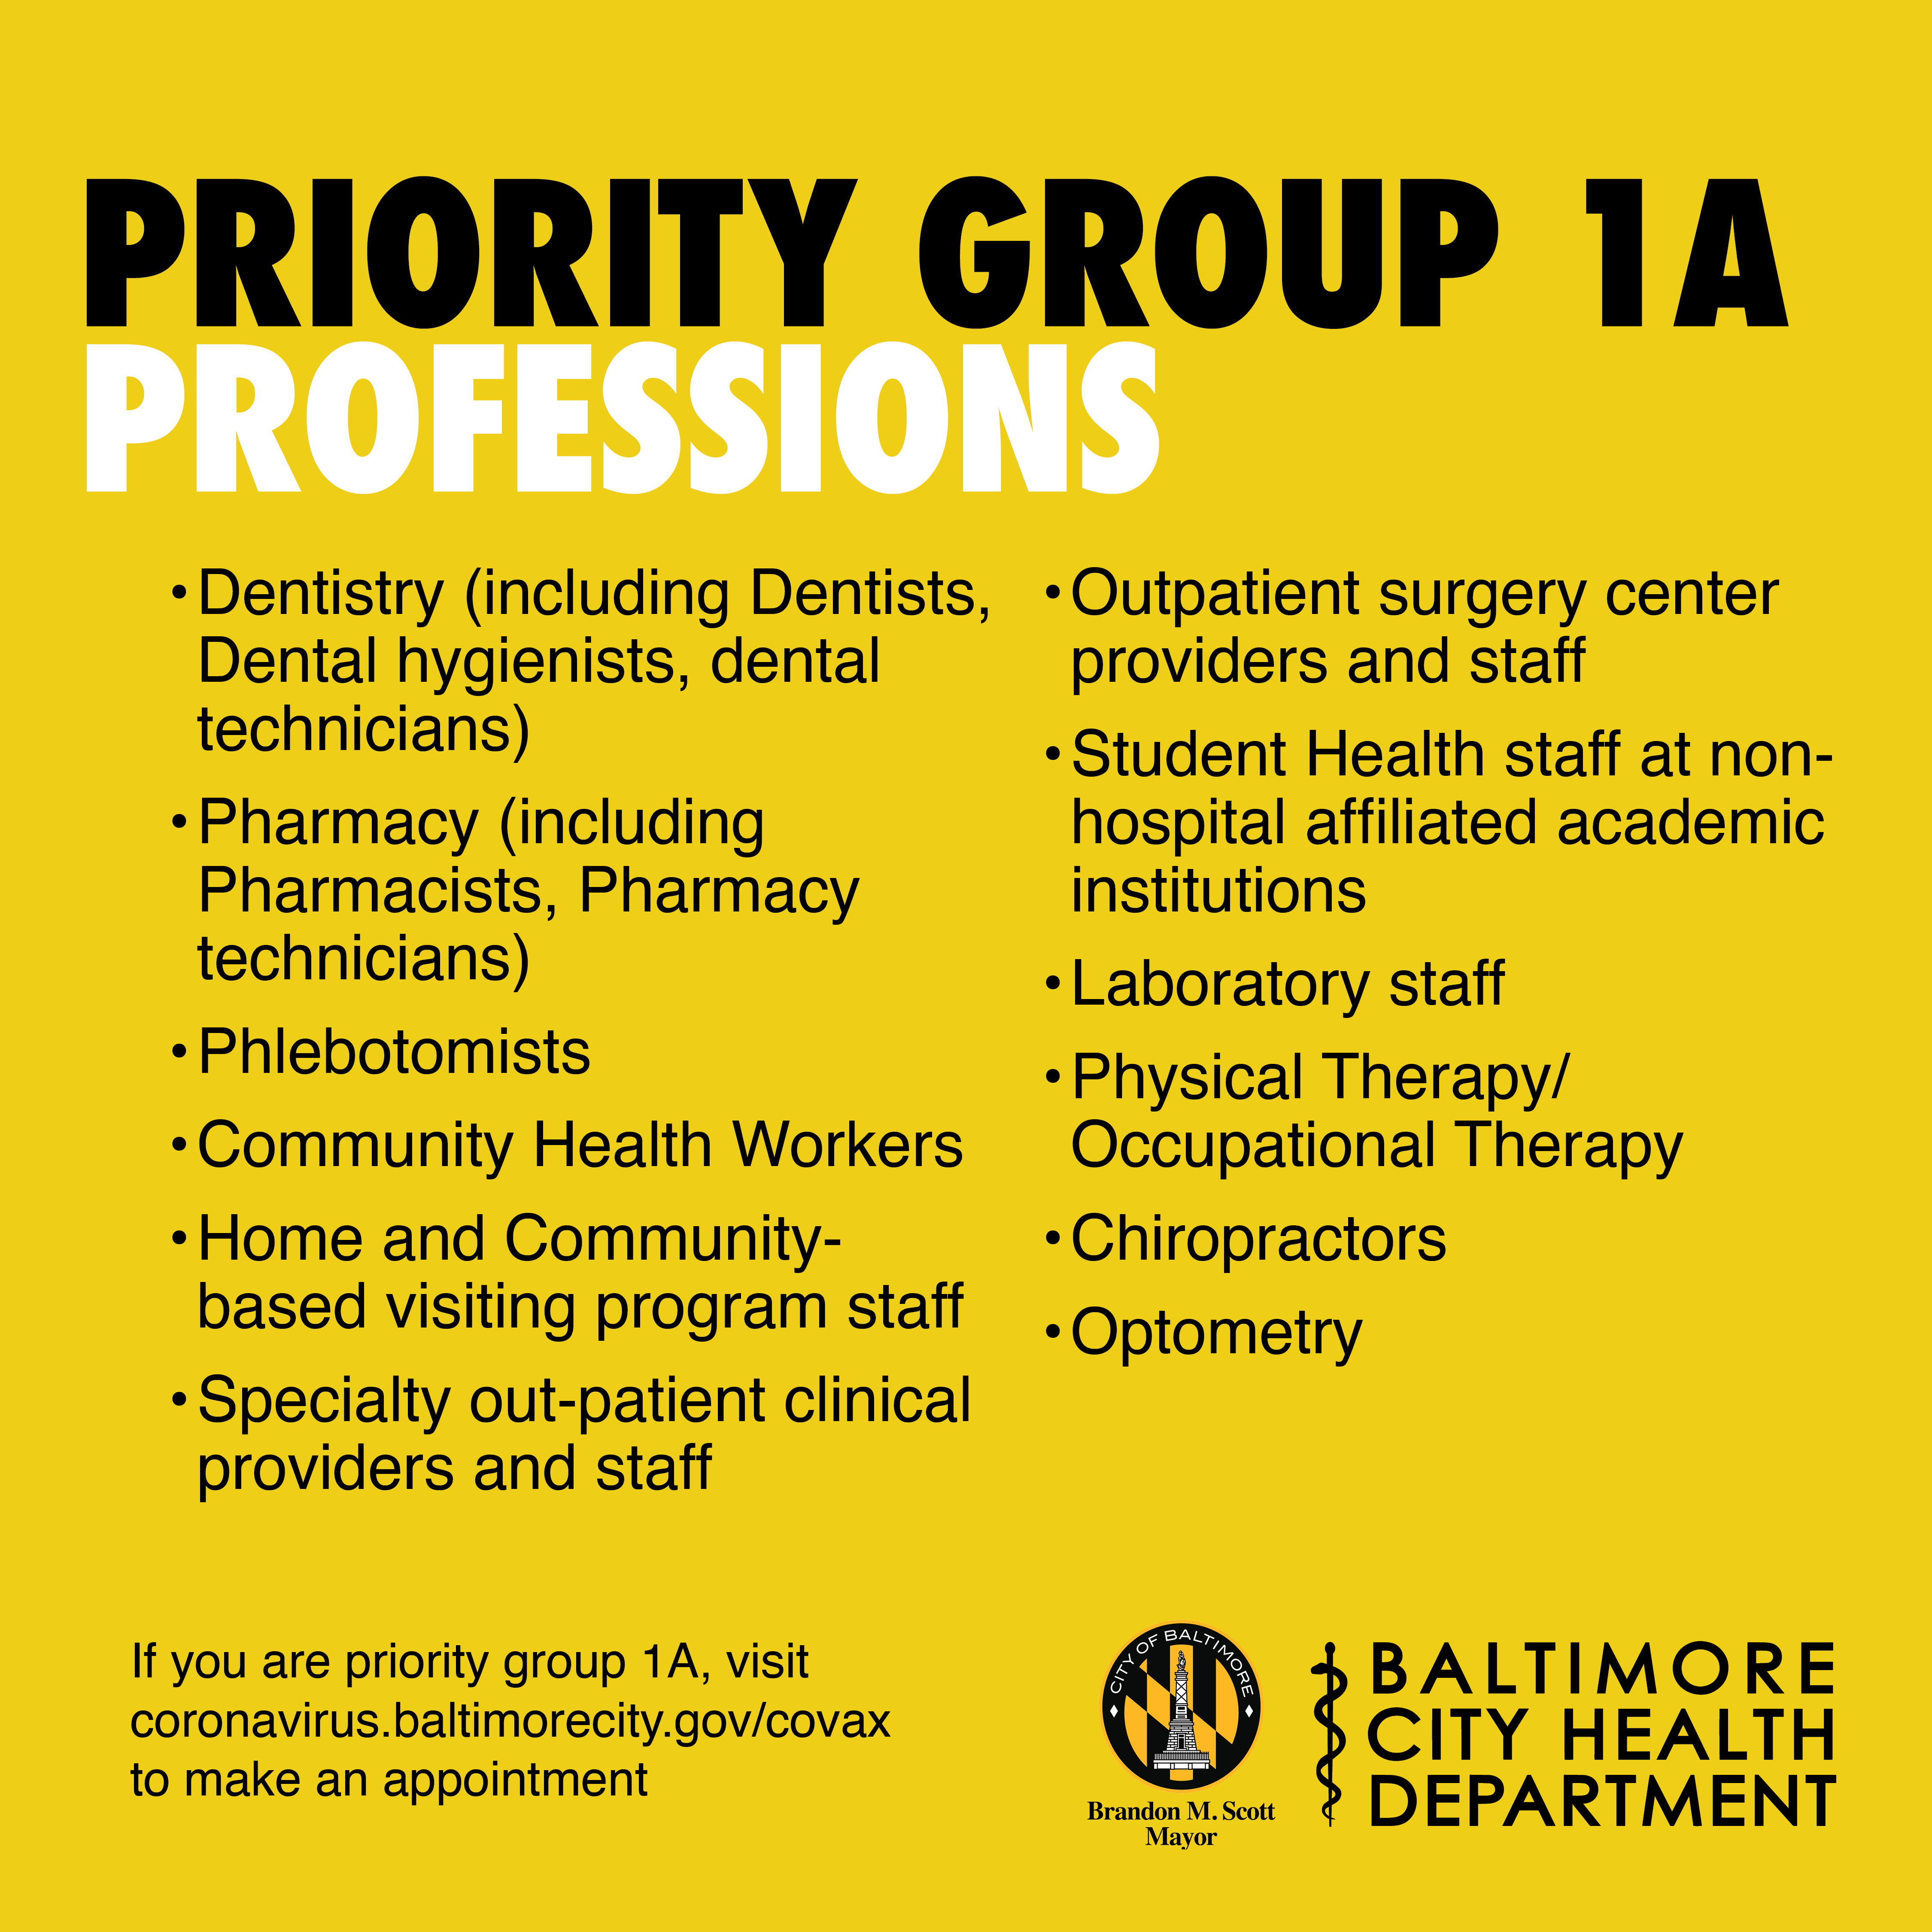 Image is text on yellow background. Text reads Prioirty Group 1A professions, Dentistry (including Dentists, Dental hygienists, dental technicians) Pharmacy (including Pharmacists, Pharmacy technicians) Phlebotomists Community Health Workers Home and Comm